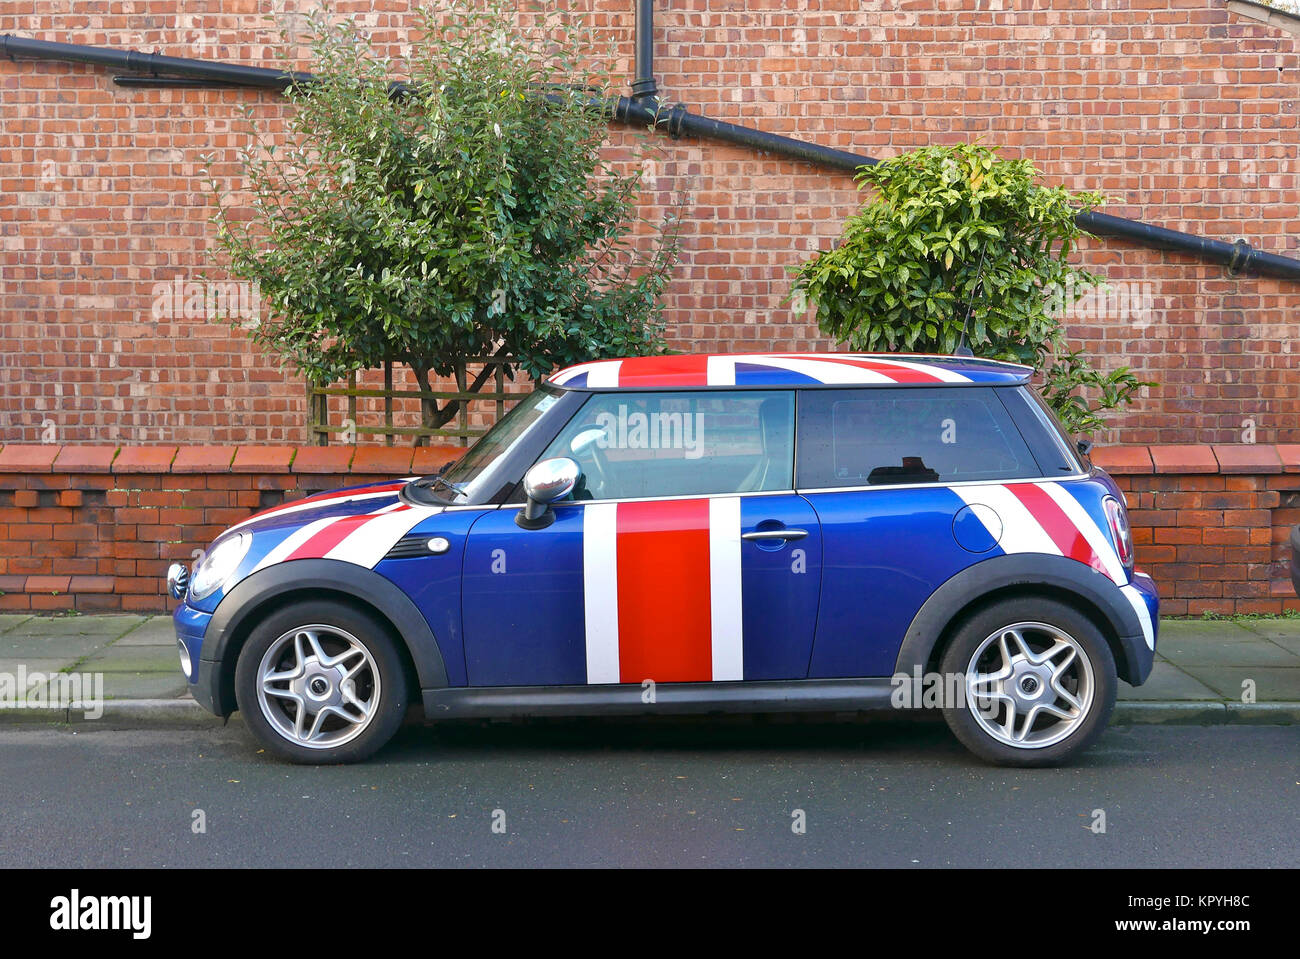 mini-car-in-union-jack-livery-parked-on-road-in-front-of-two-trees-KPYH8C.jpg